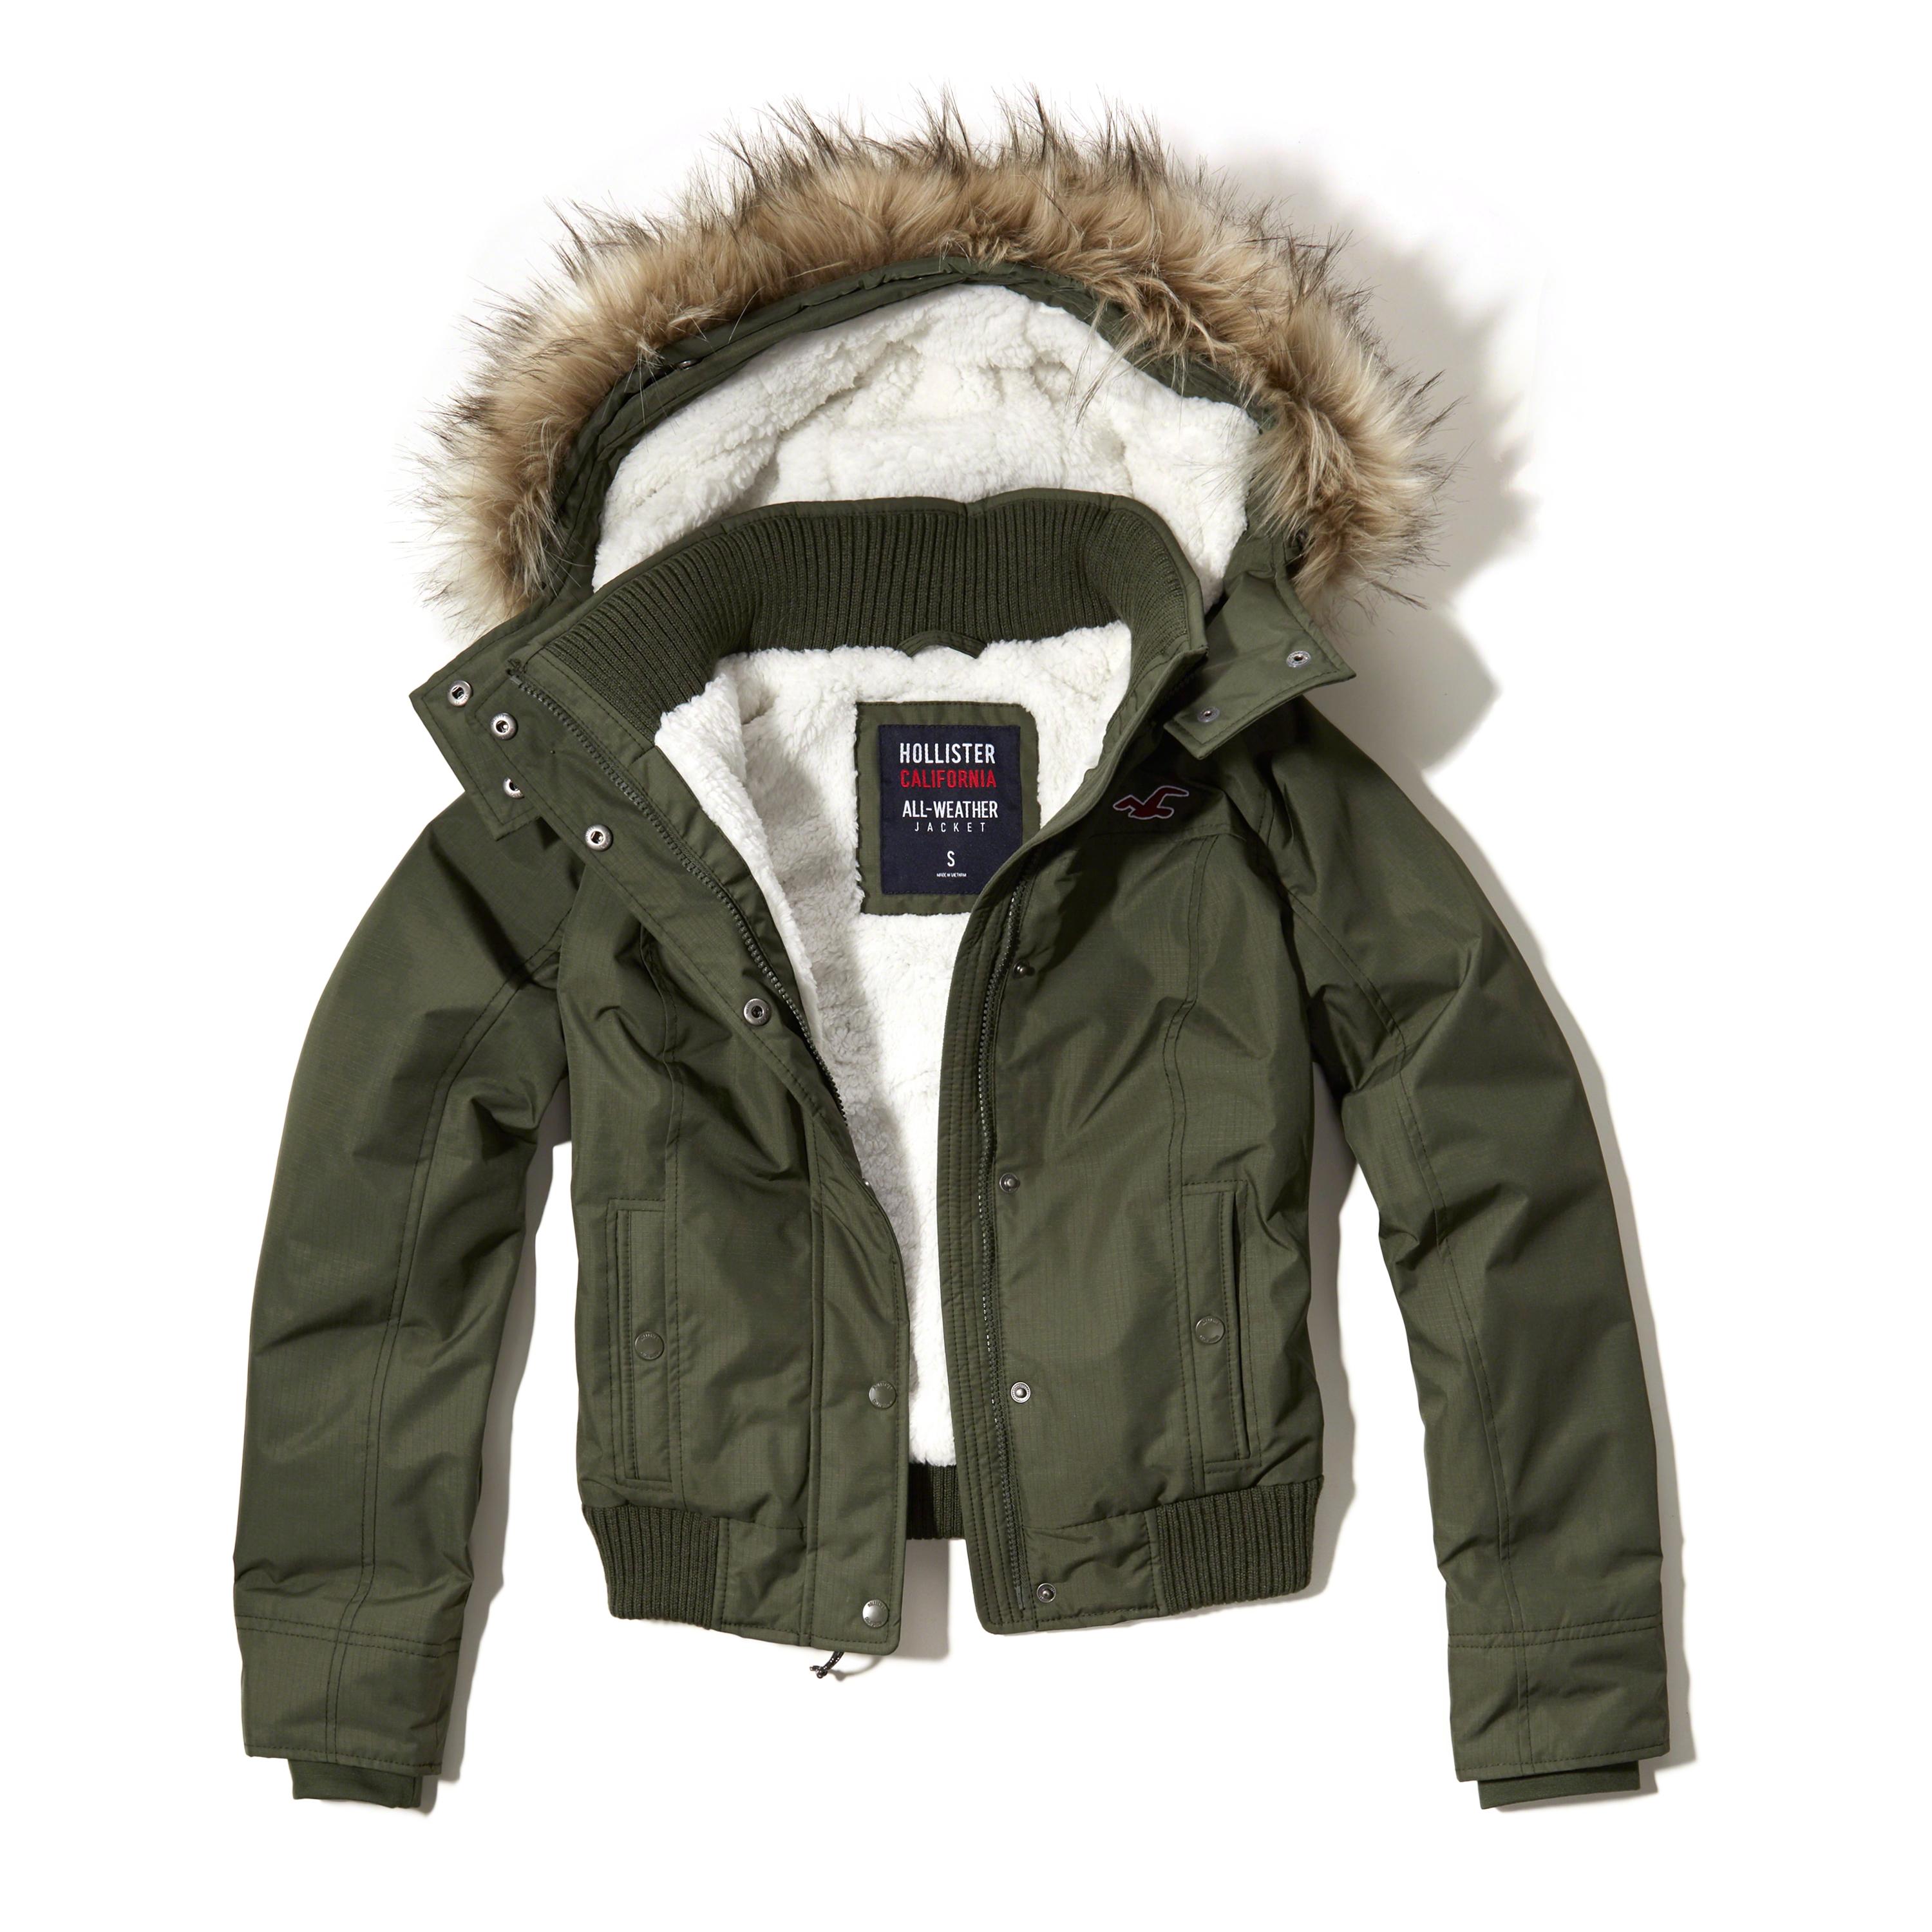 Lyst - Hollister All-weather Sherpa Lined Bomber Jacket